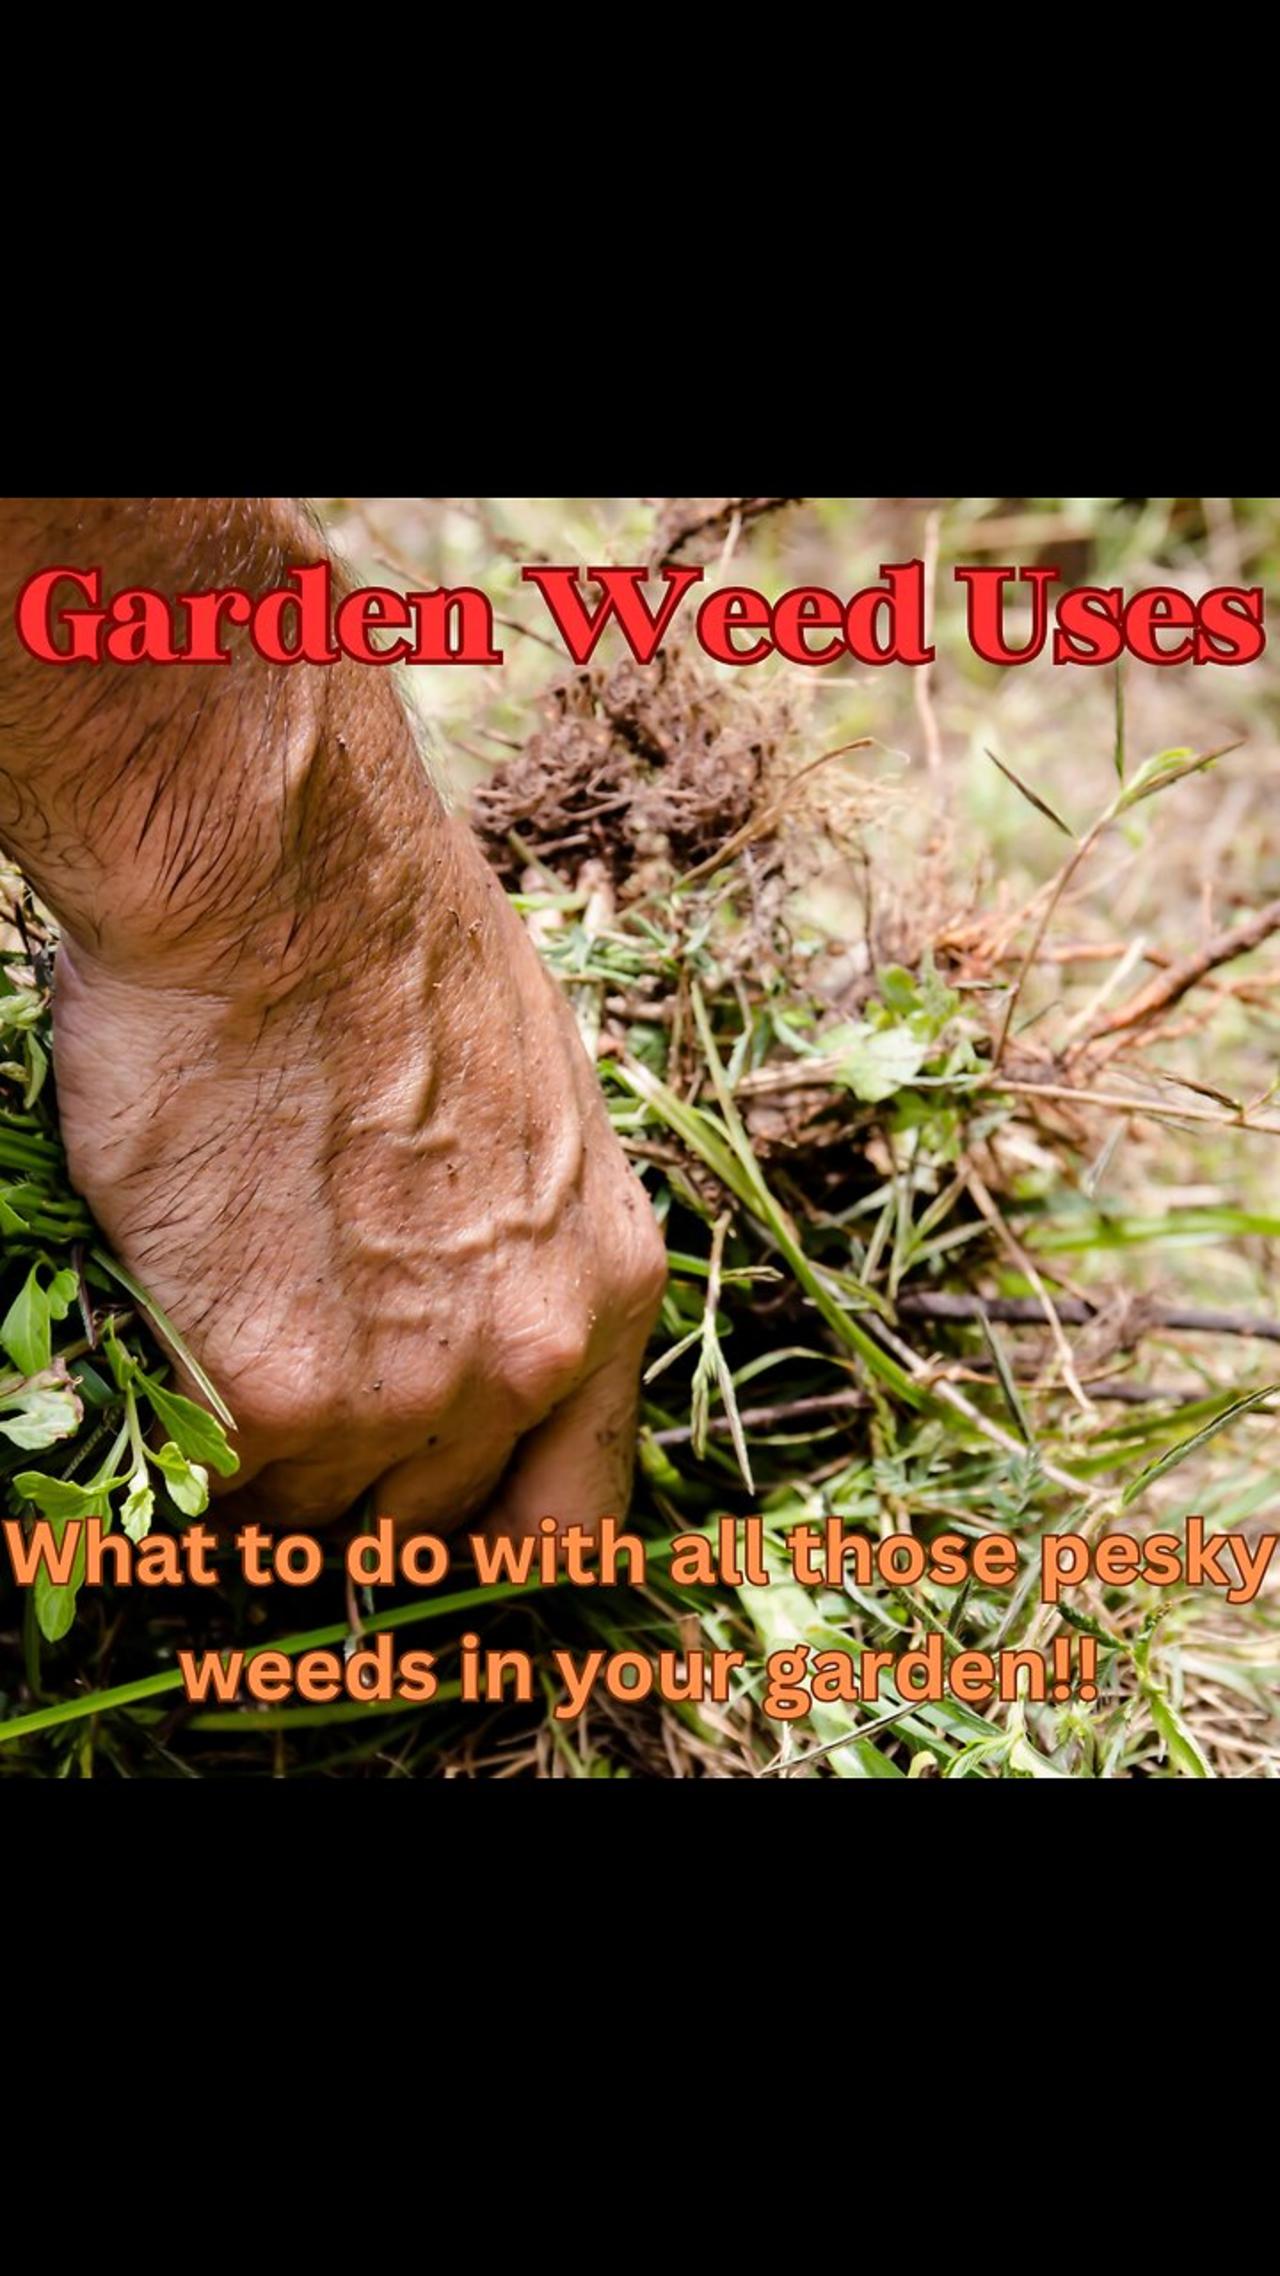 Garden weed uses